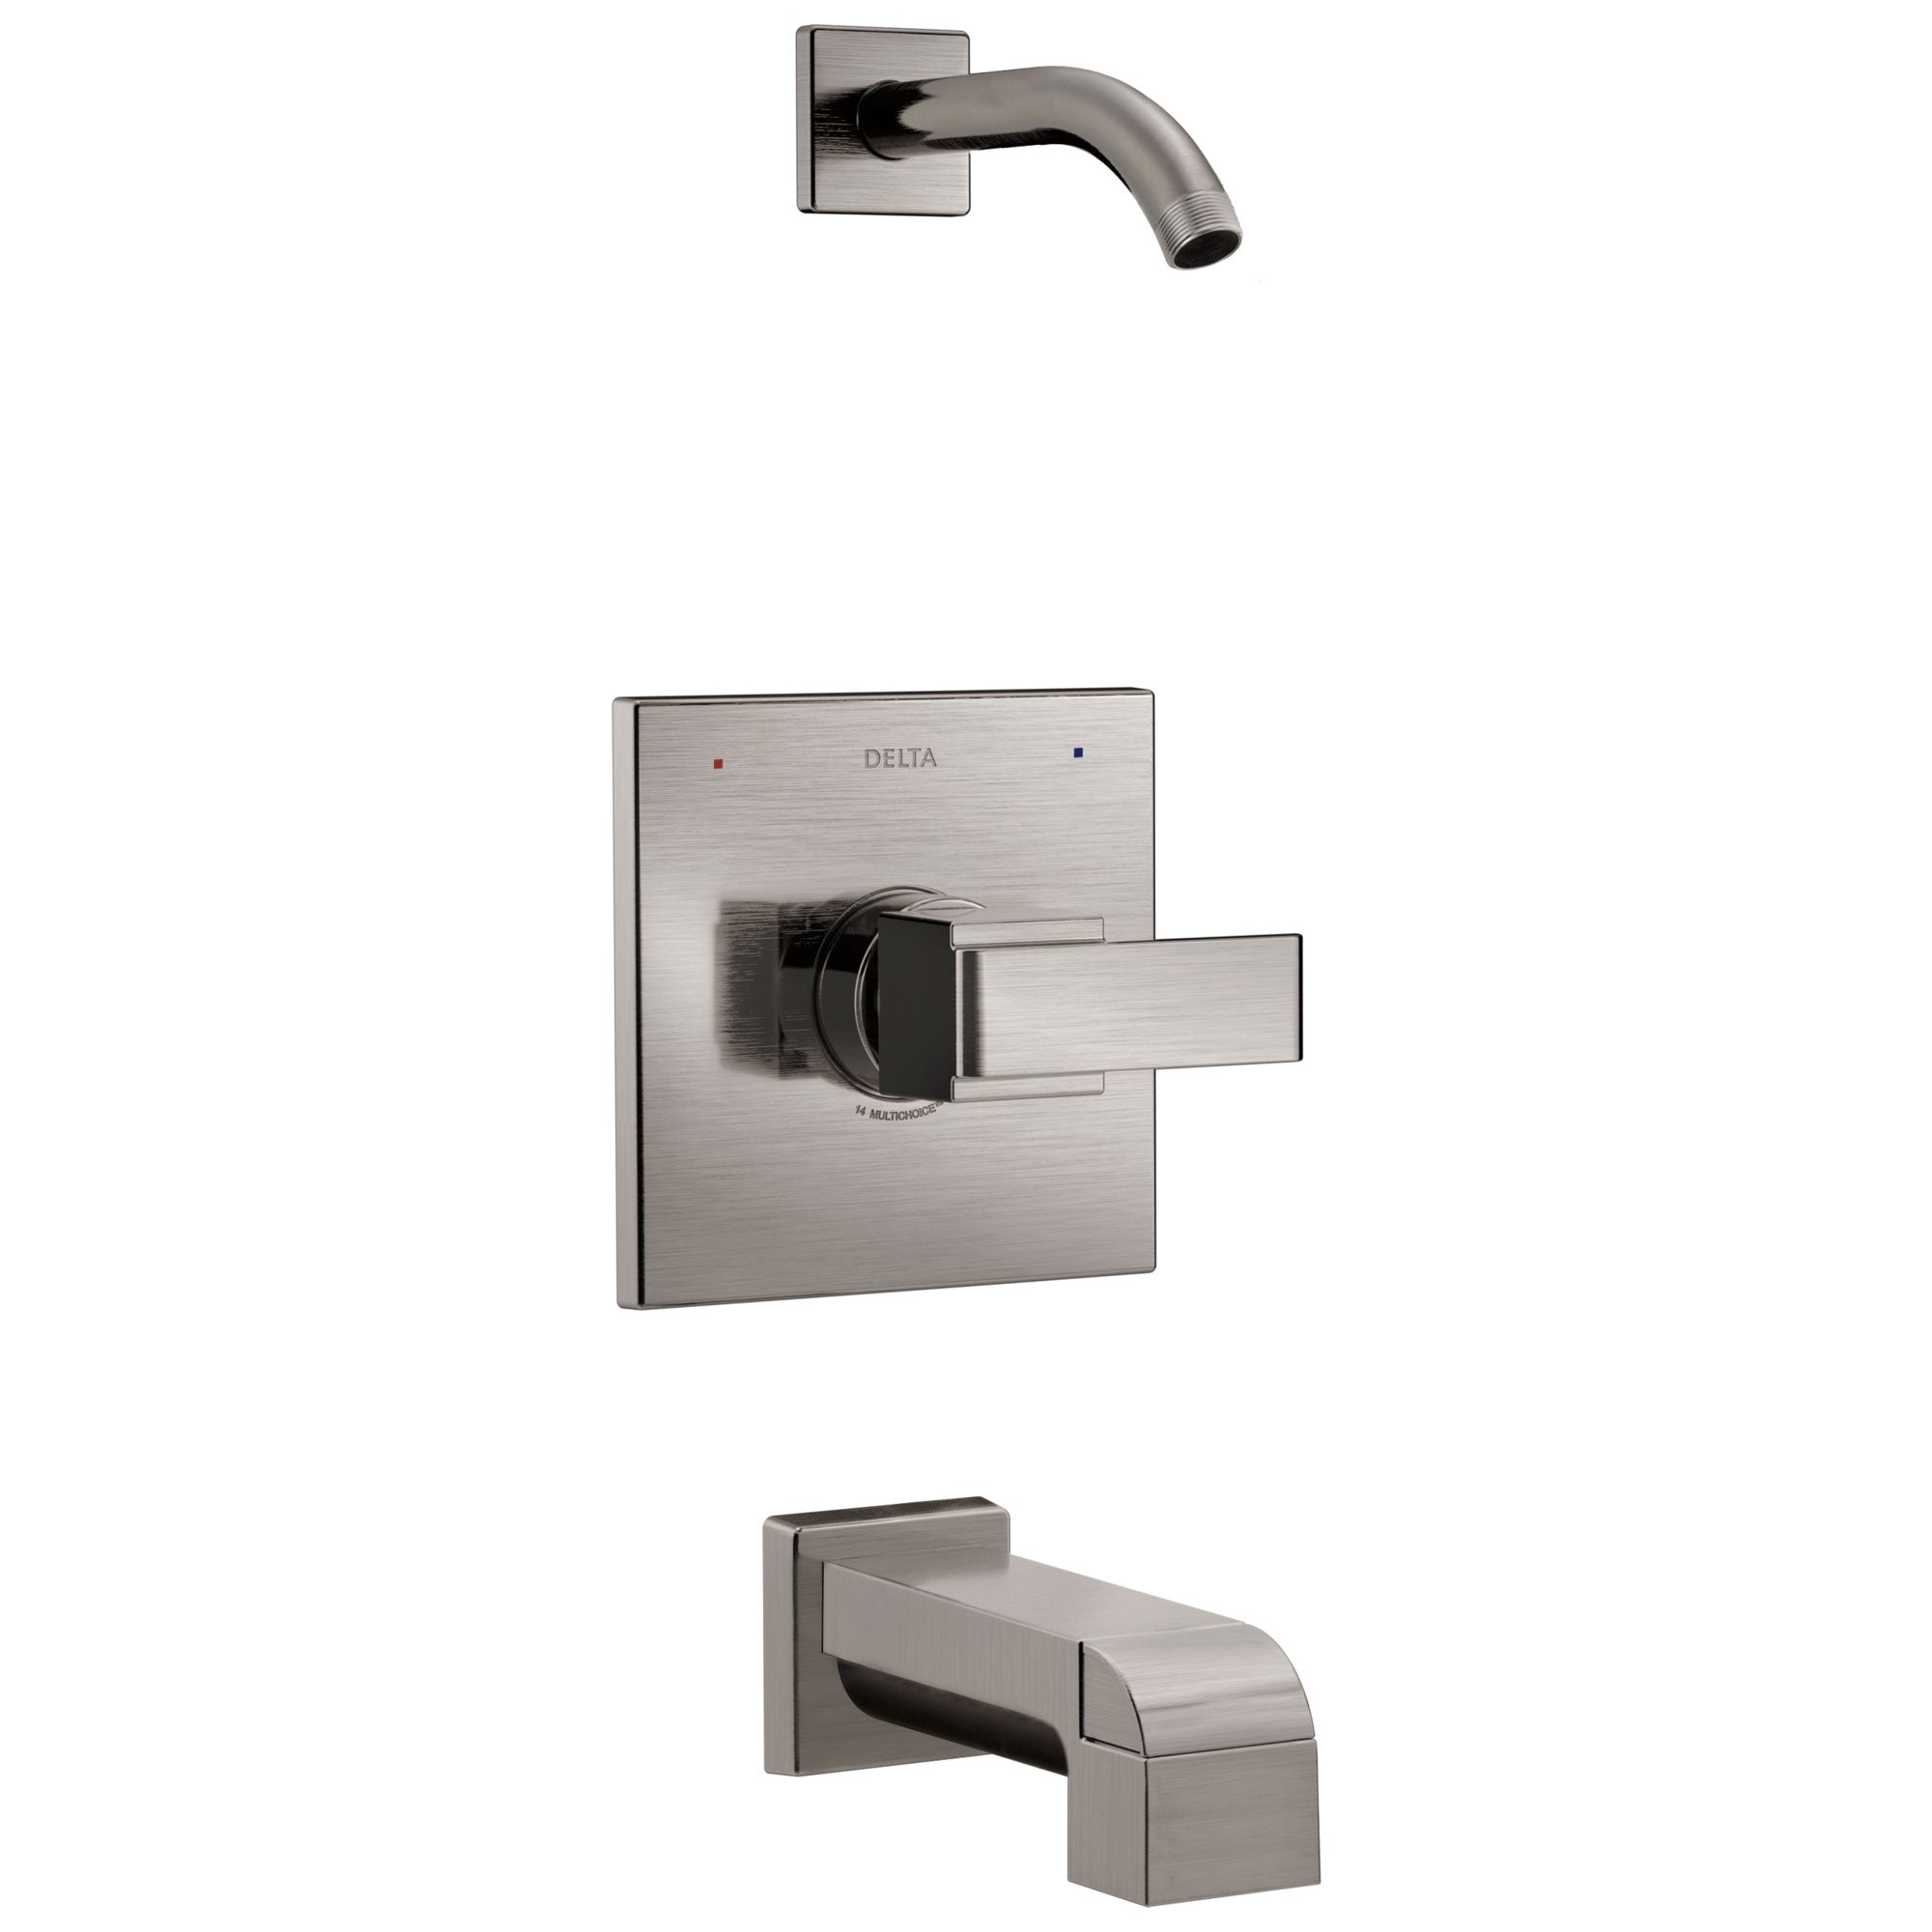 Delta Ara 1-Handle Tub and Shower Faucet Trim Kit in Stainless Steel Finish with Less Showerhead (Valve Not Included) 682972